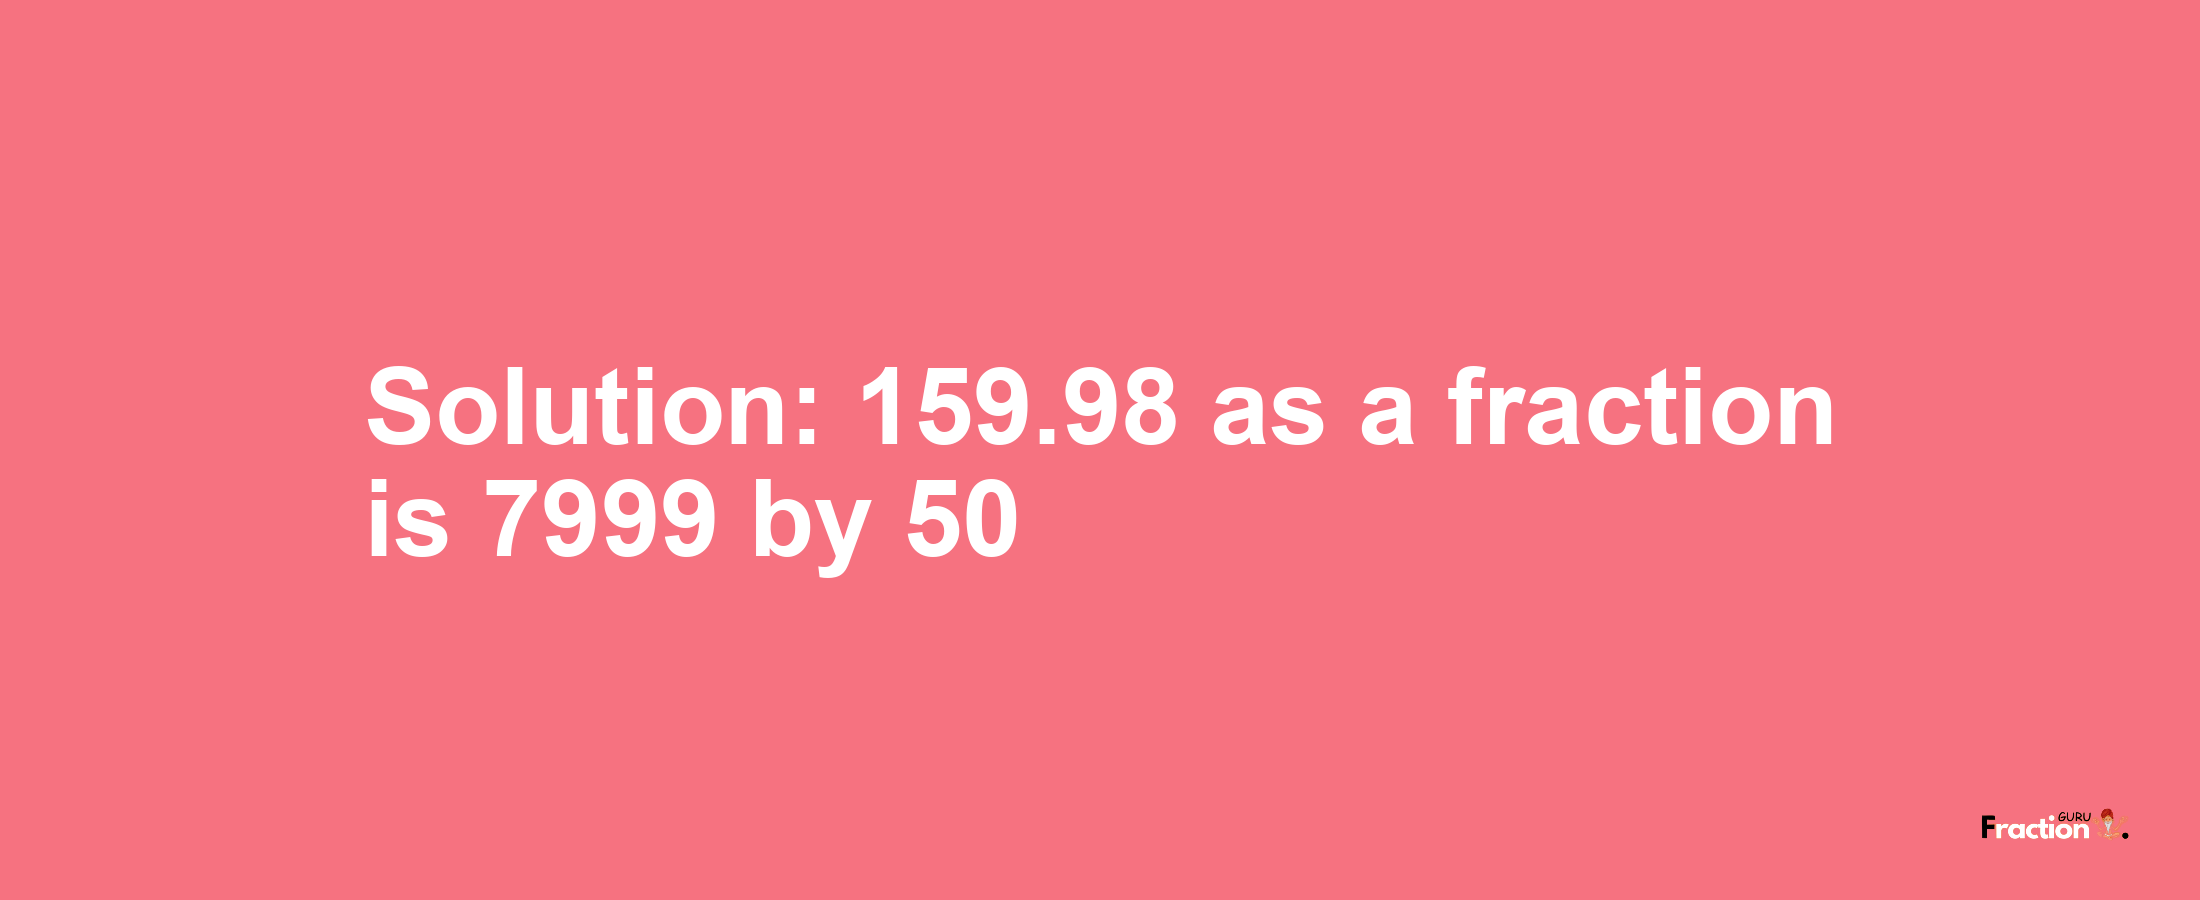 Solution:159.98 as a fraction is 7999/50